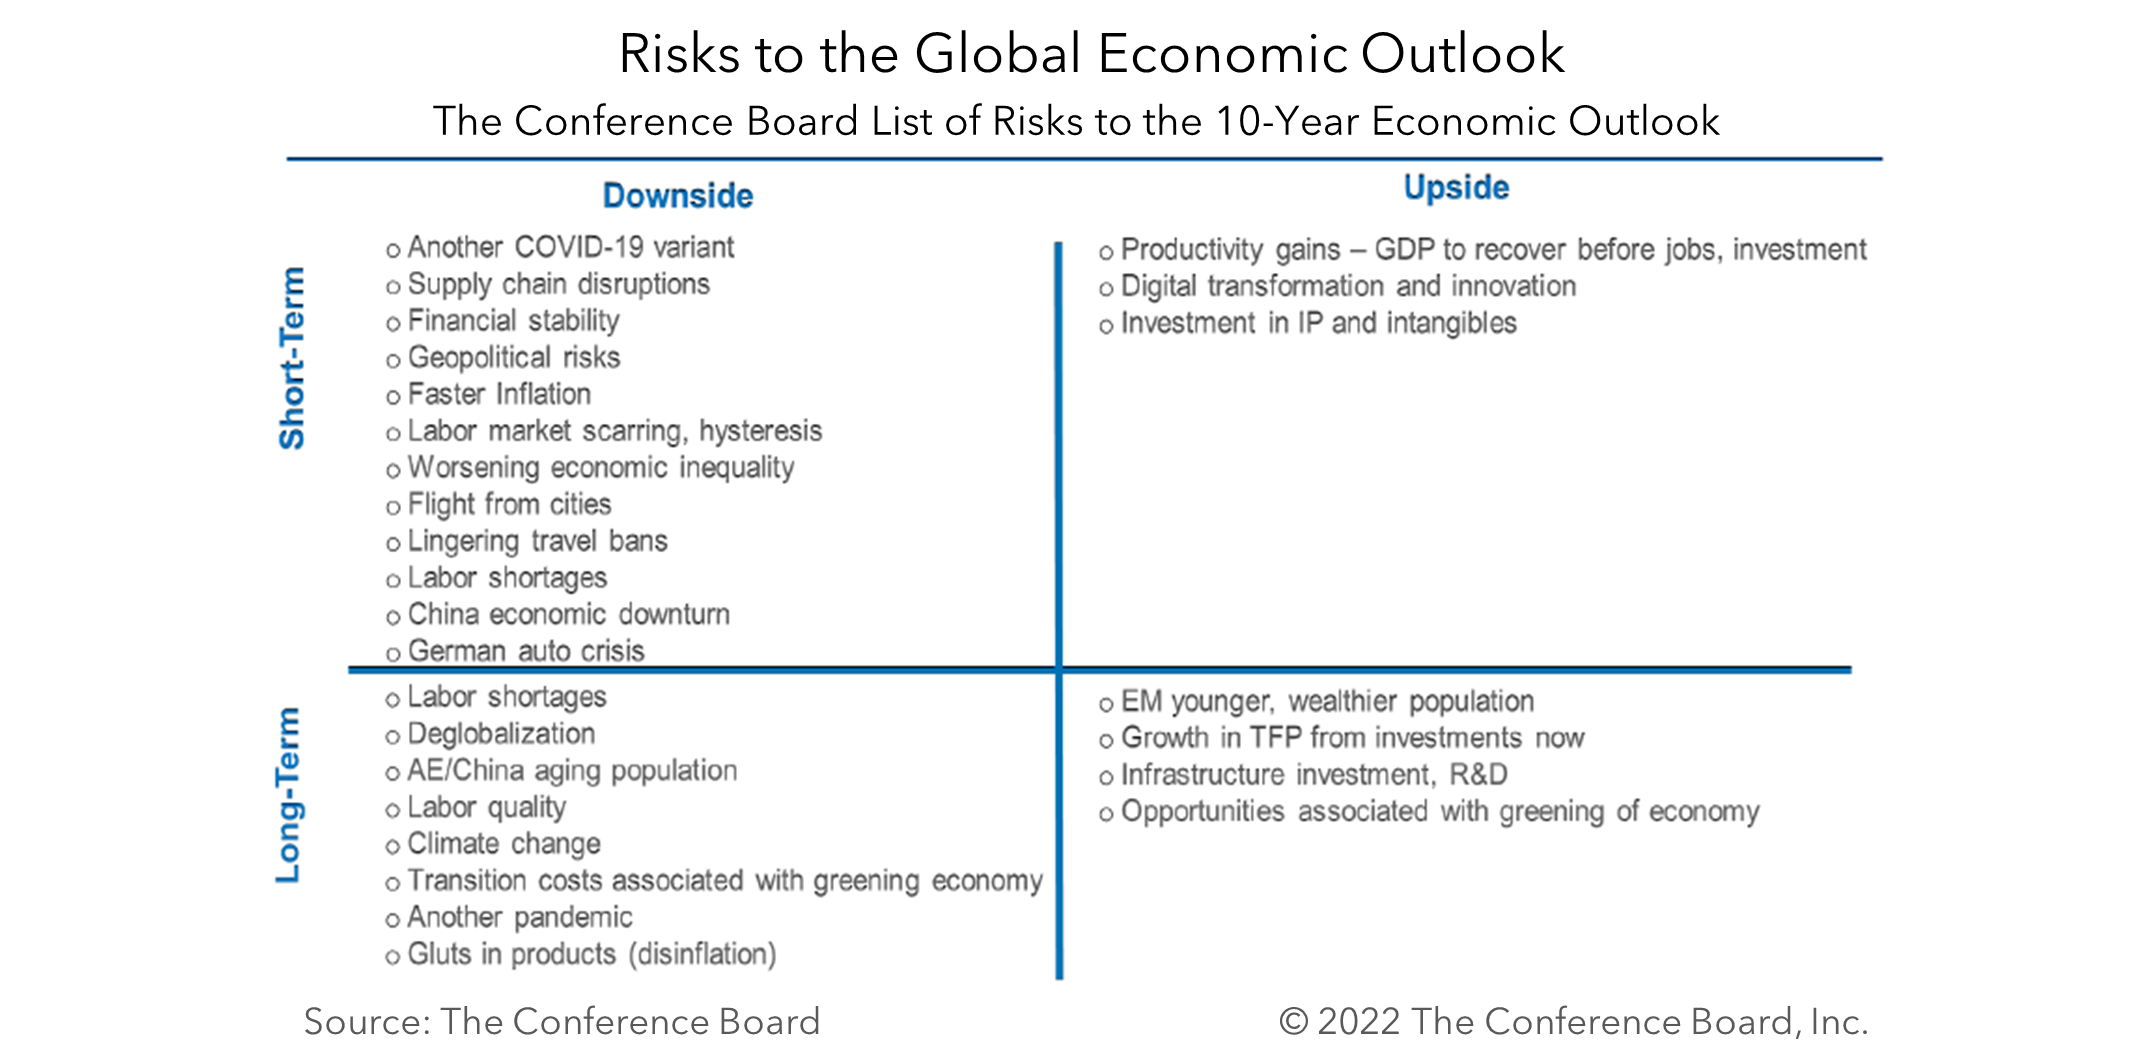 A Deep Dive on Risks to the Global Economic Outlook